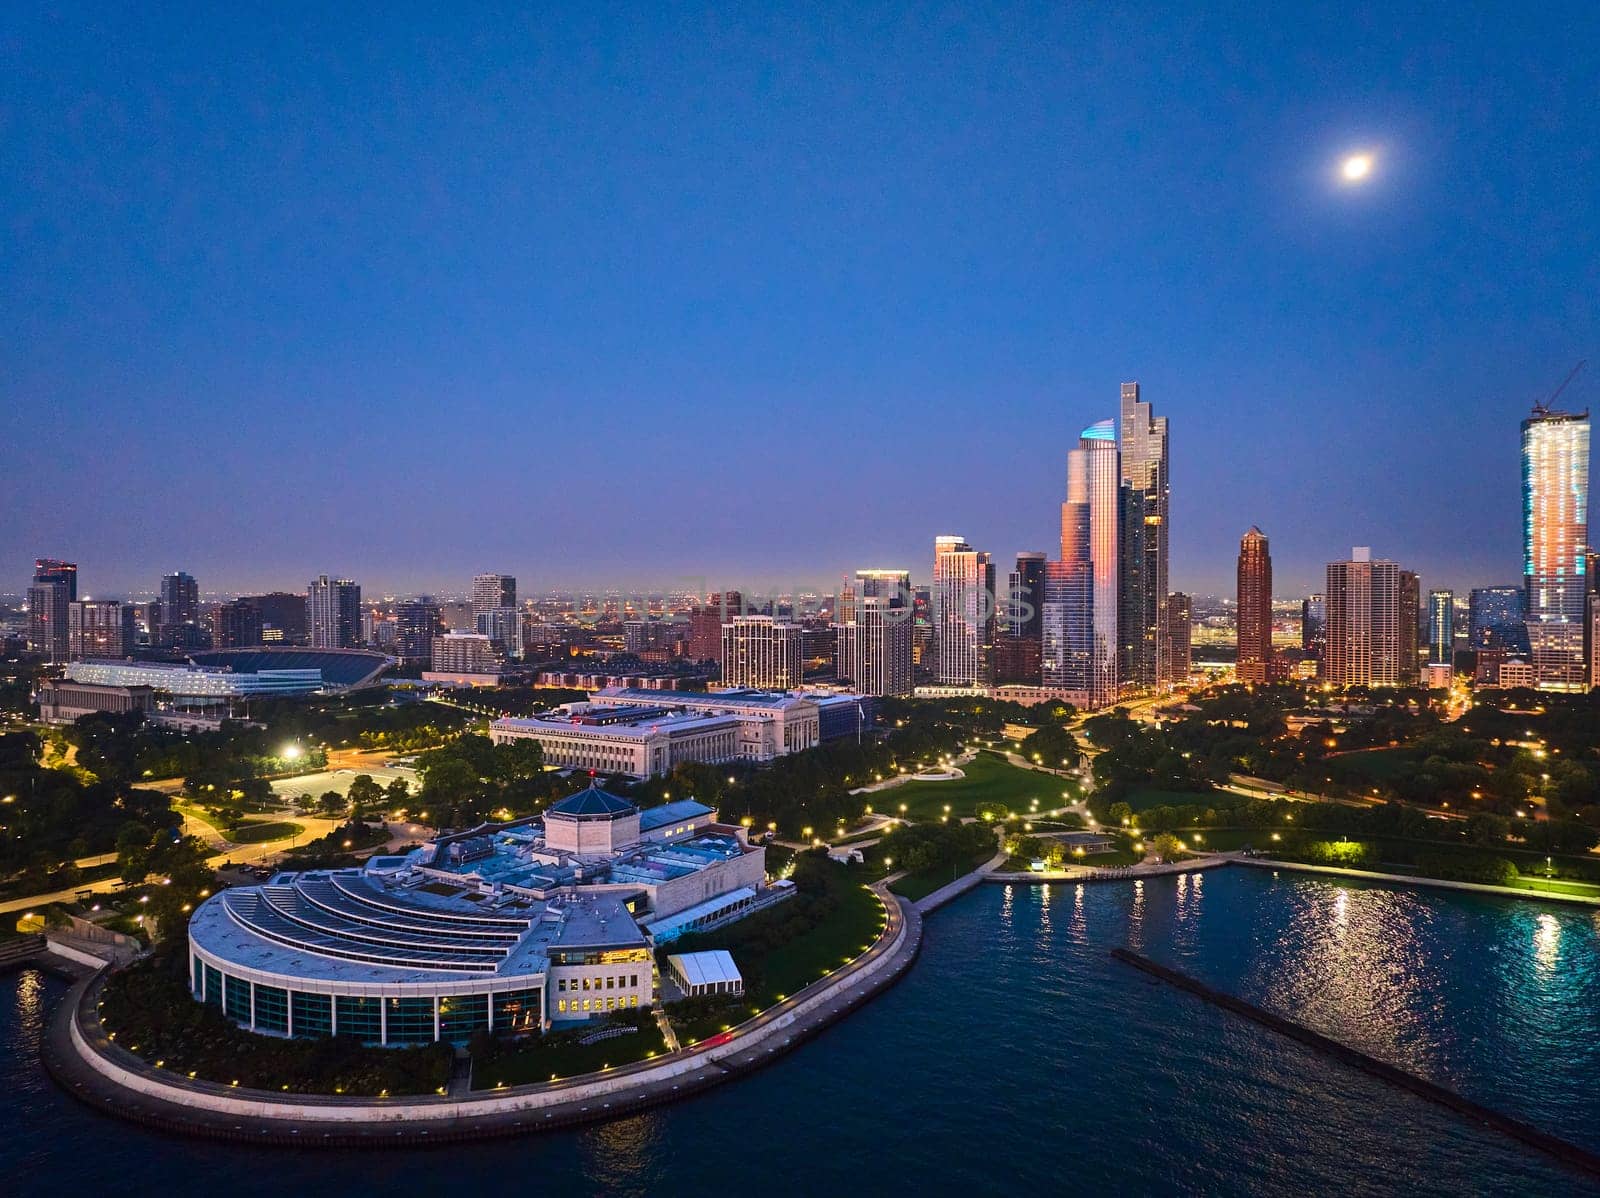 Shedd Aquarium aerial Chicago with moon over city lights at night with harbor and Lake Michigan by njproductions